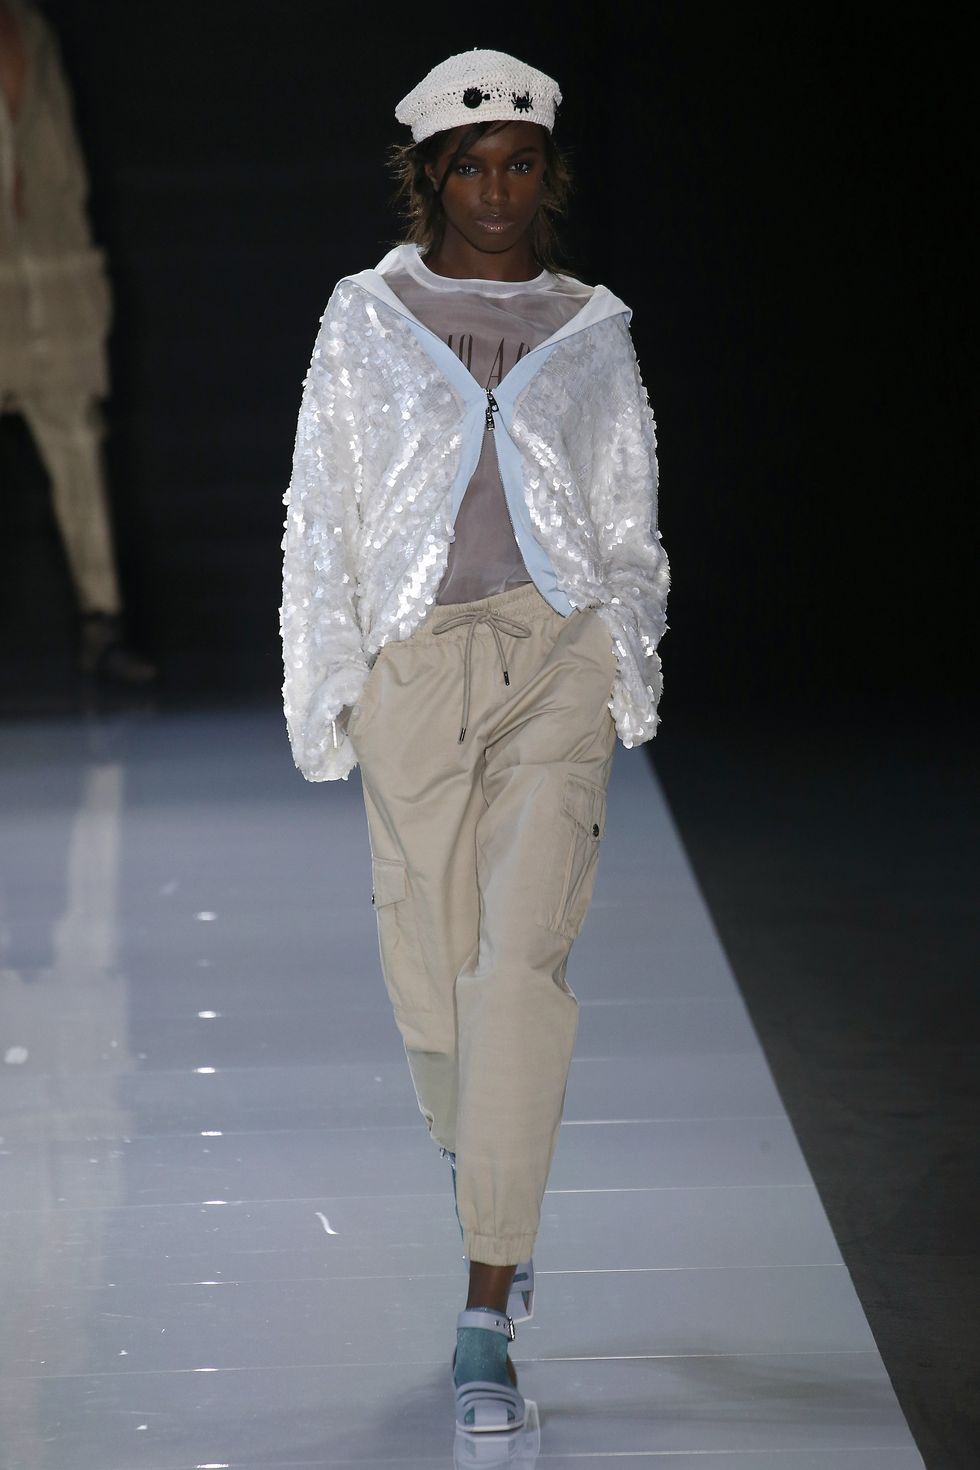 Leomie Anderson walks for Emporio Armani's S/S18 show at LFW